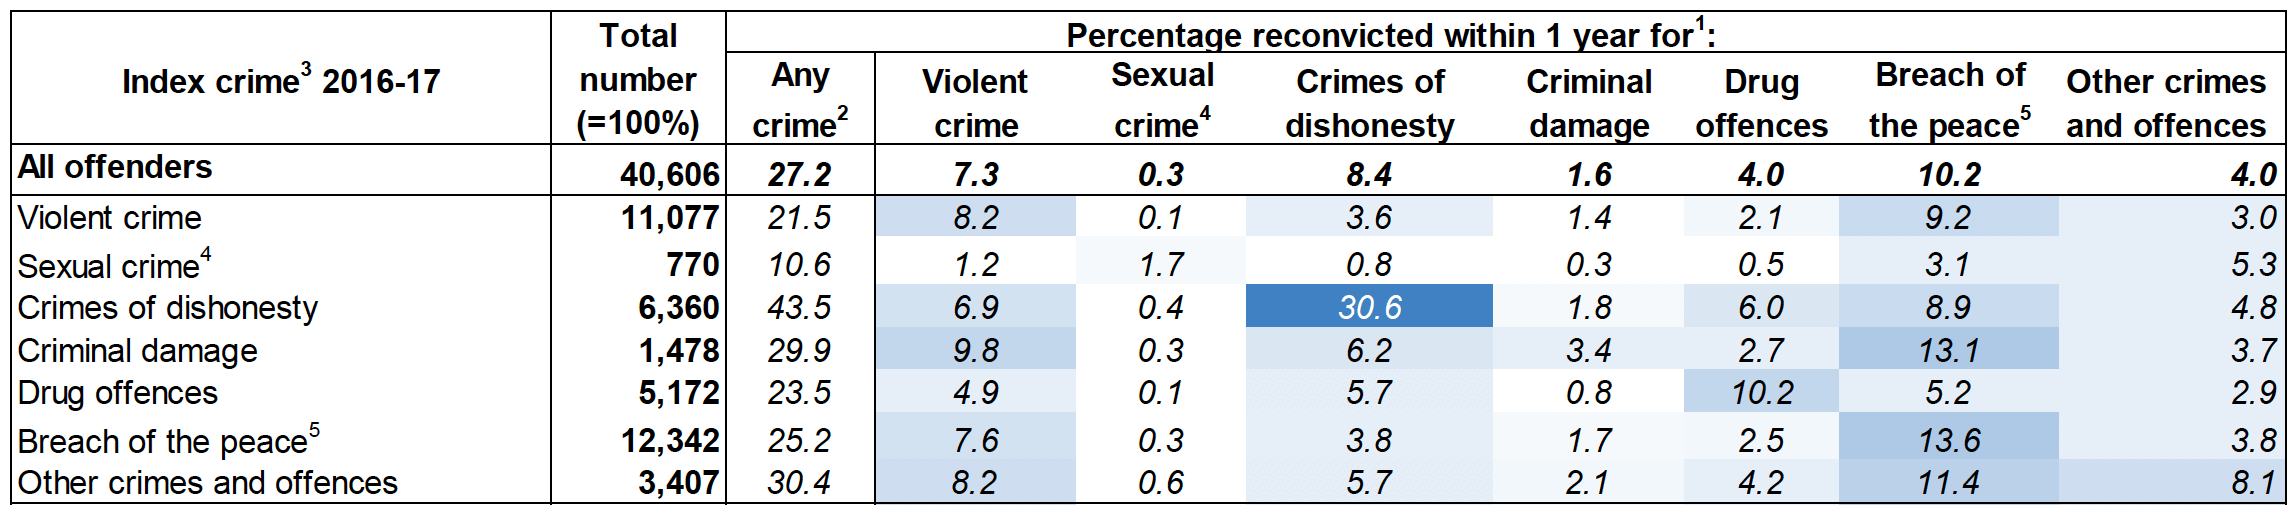 Table 7: Reconviction rates for crimes by index crime: 2016-17 cohort